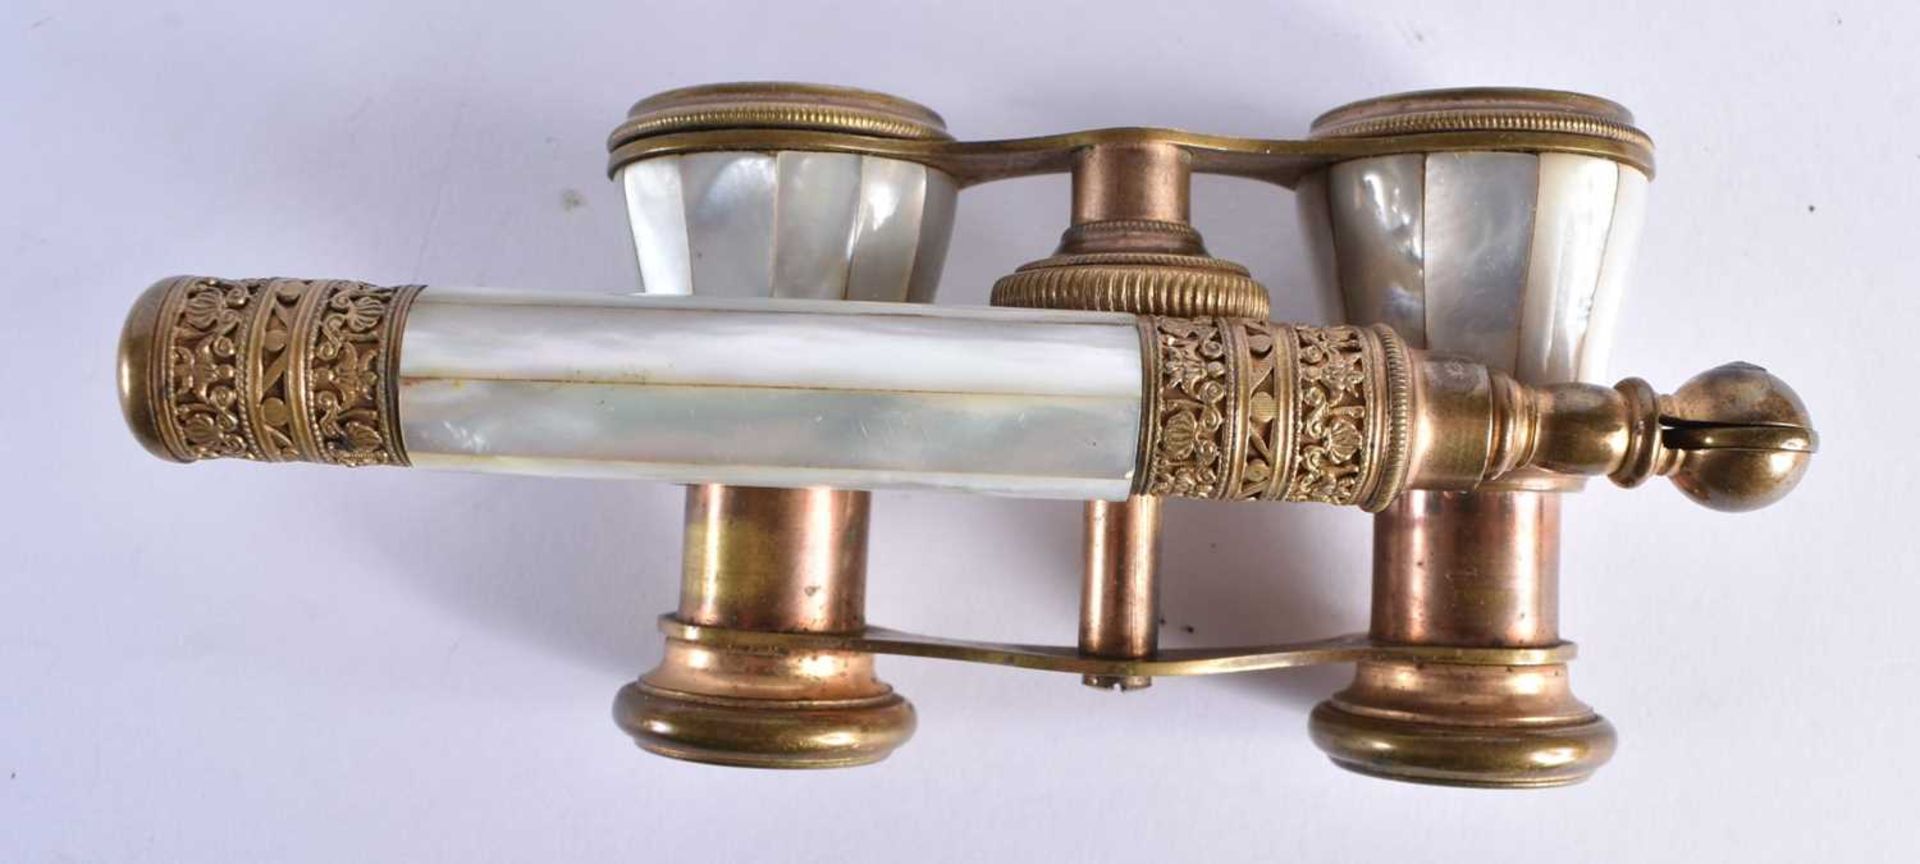 A PAIR OF MOTHER OF PEARL OPERA GLASSES 6 x 23cm extended - Image 3 of 8